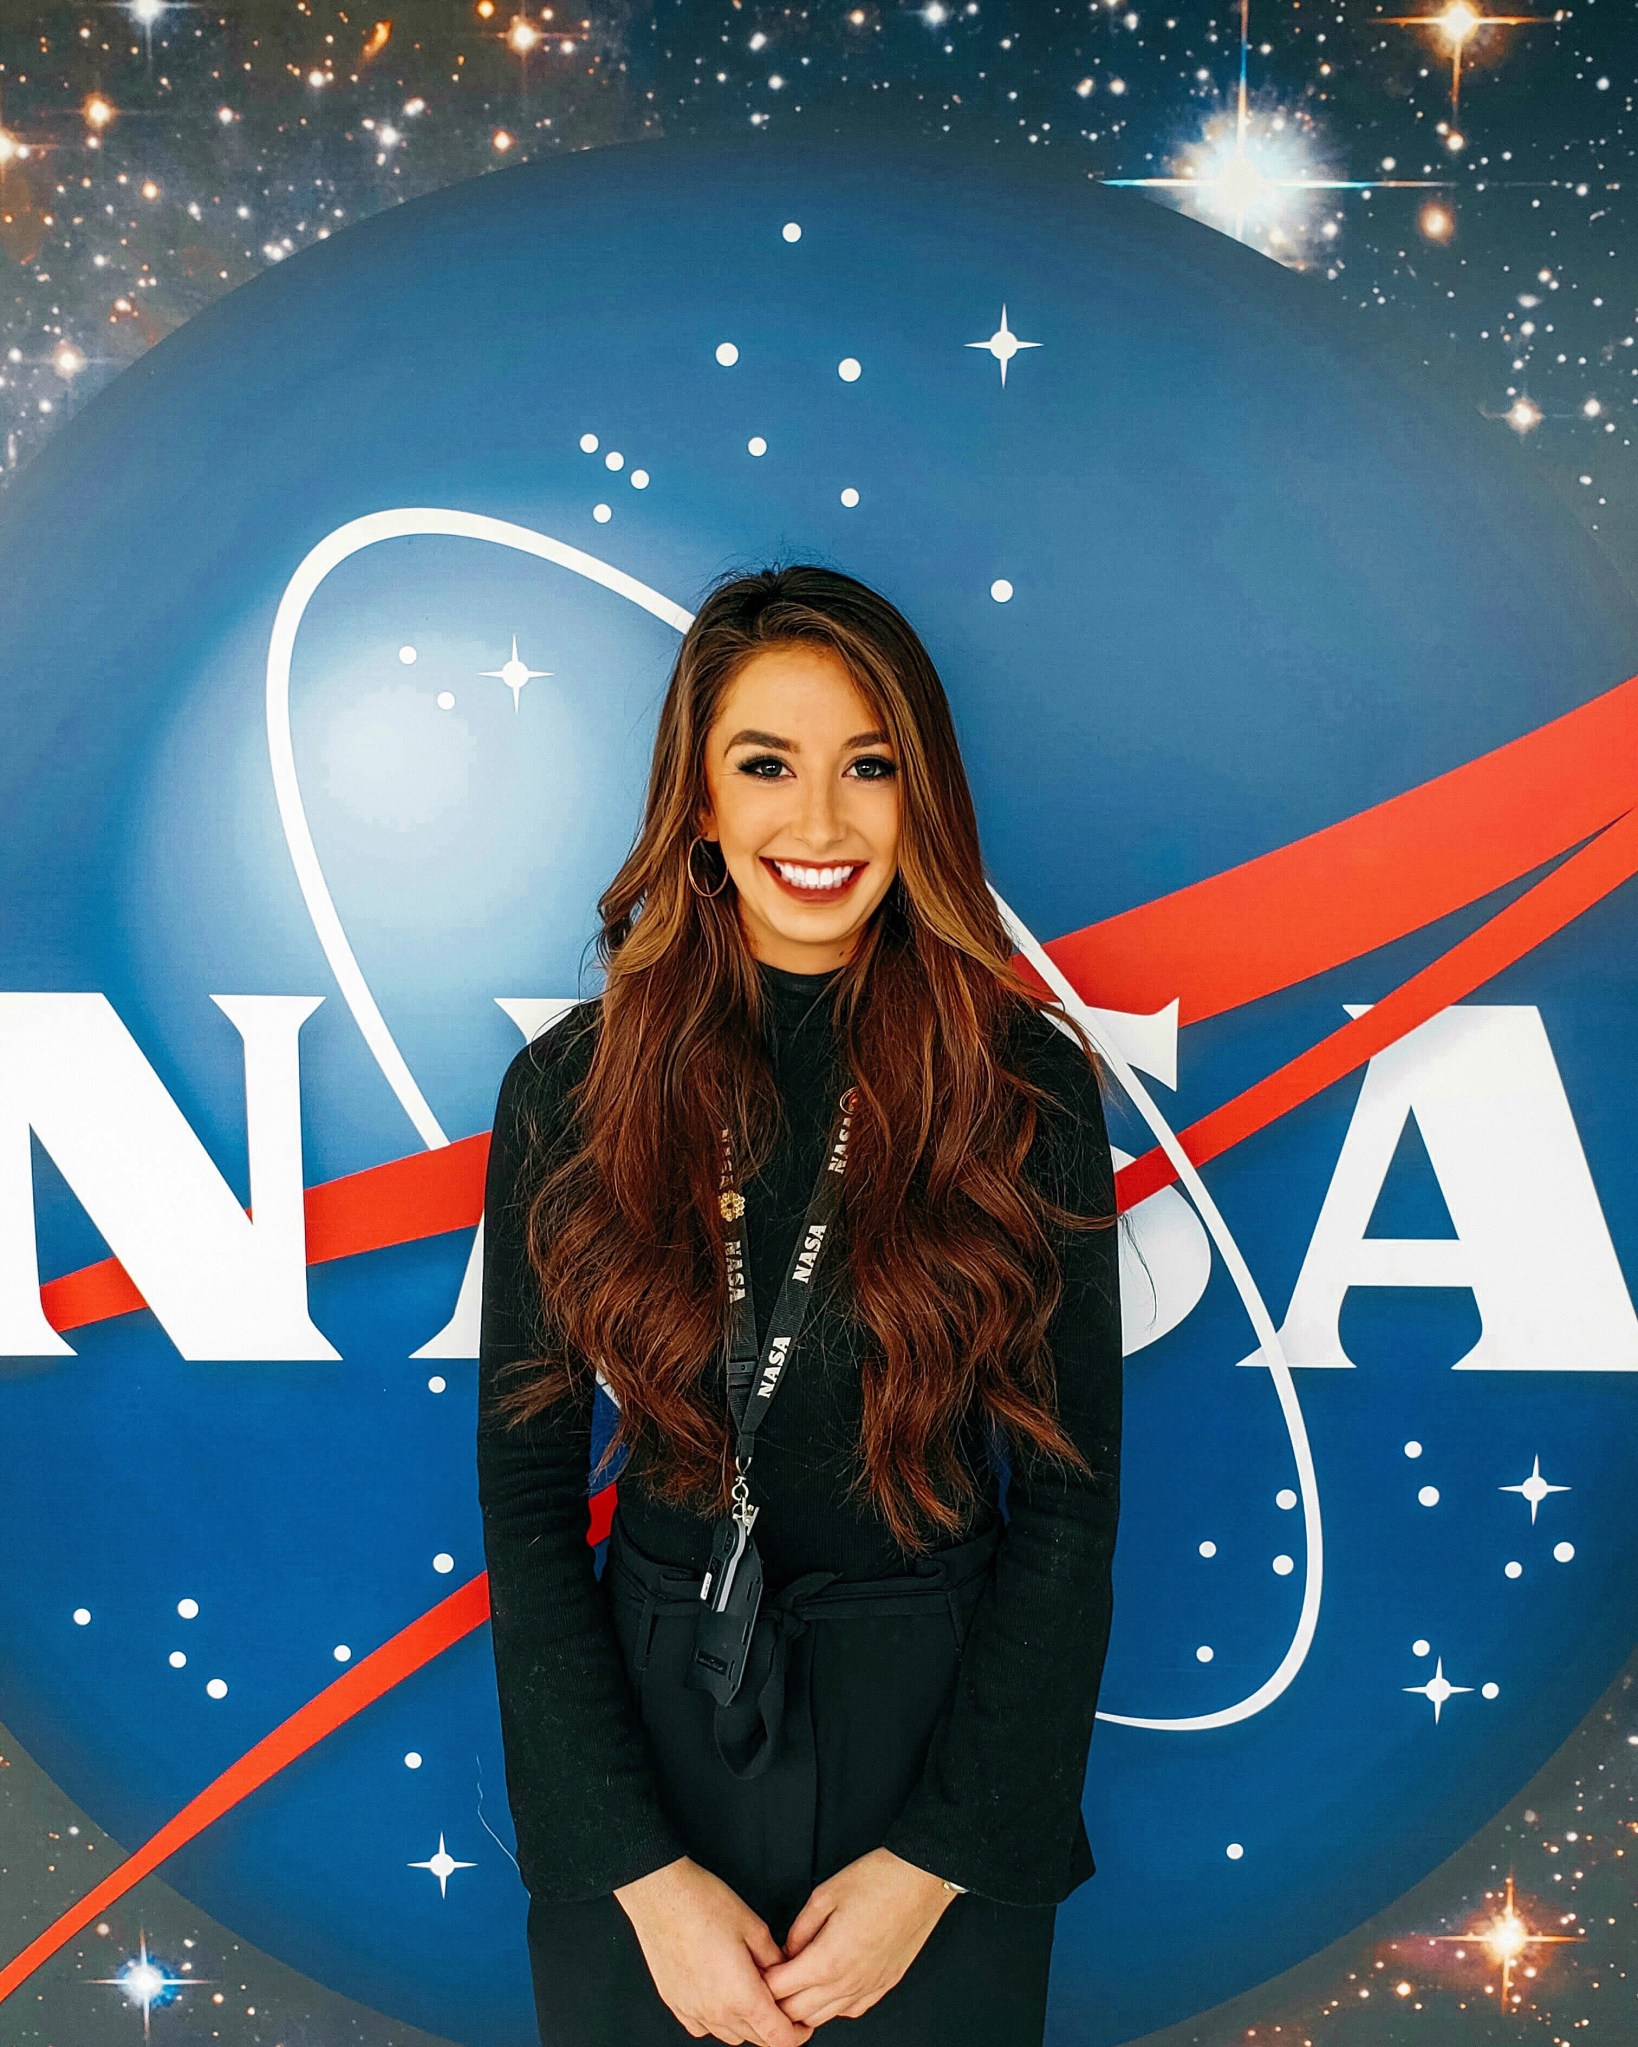 Woman with long, dark, wavy brown hair wearing a black long sleeve shirt, black pants, and a black NASA lanyard stands, smiling, in front of a large NASA meatball sign.